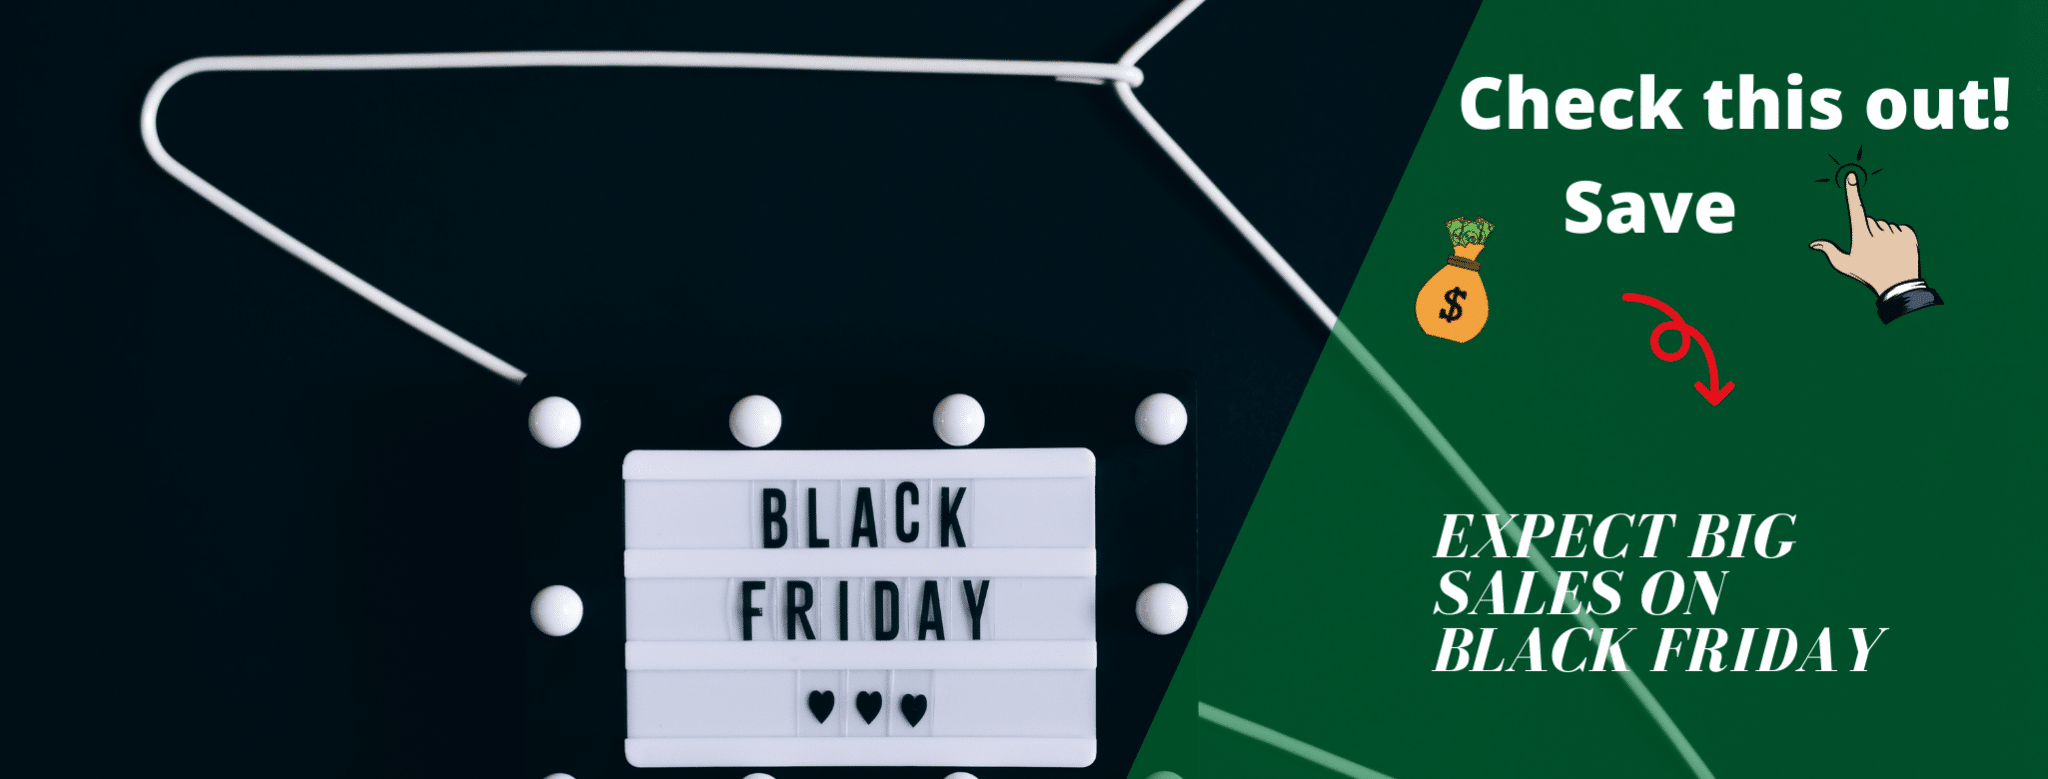 Expect Big Sales on Black Friday